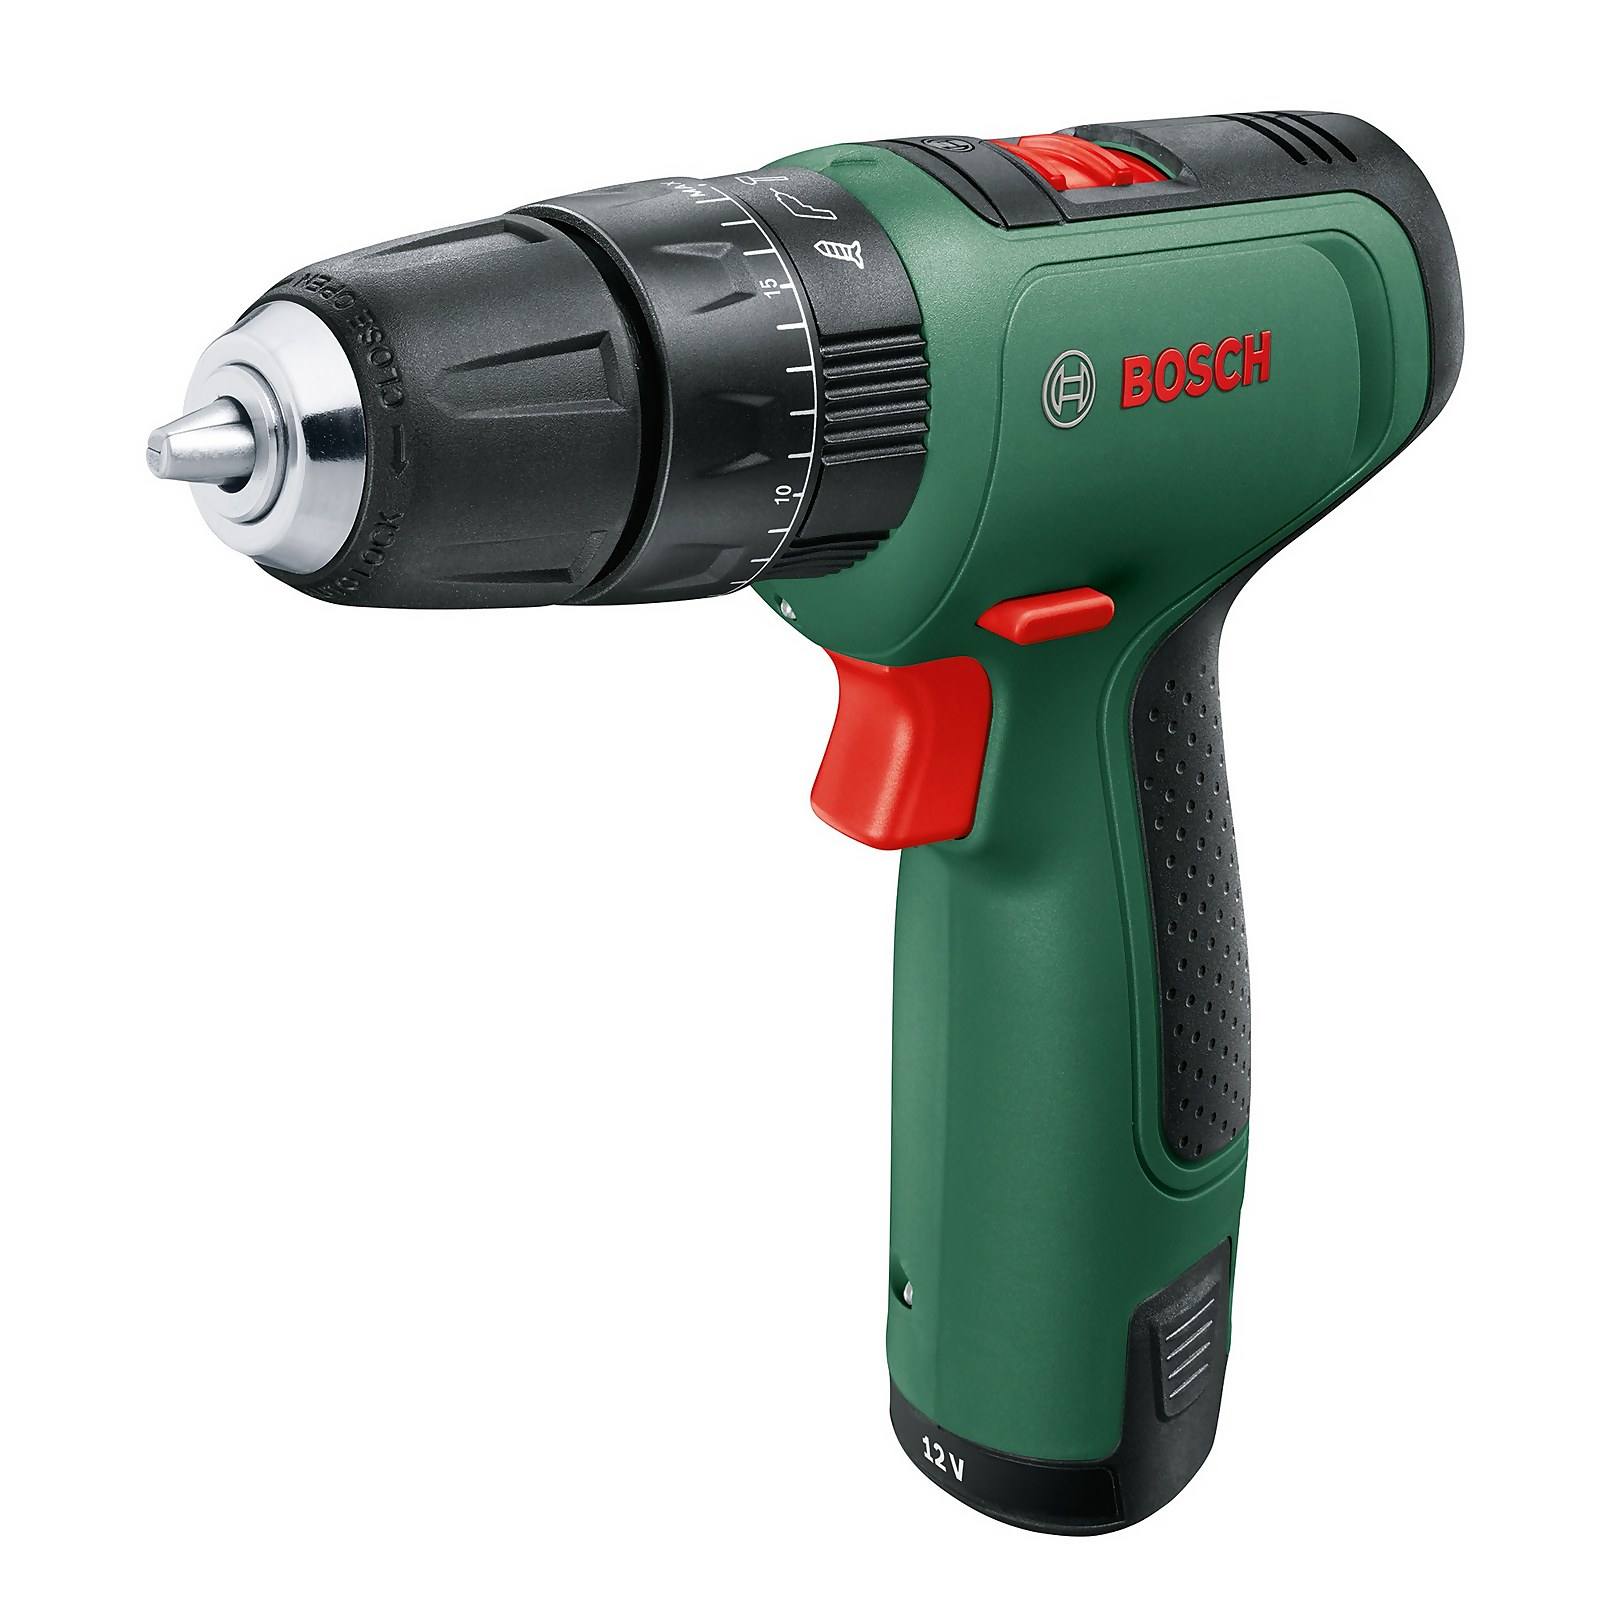 Photo of Bosch Easyimpact 1200 Combi Drill With 1 X 1.5 Ah Battery & Charger